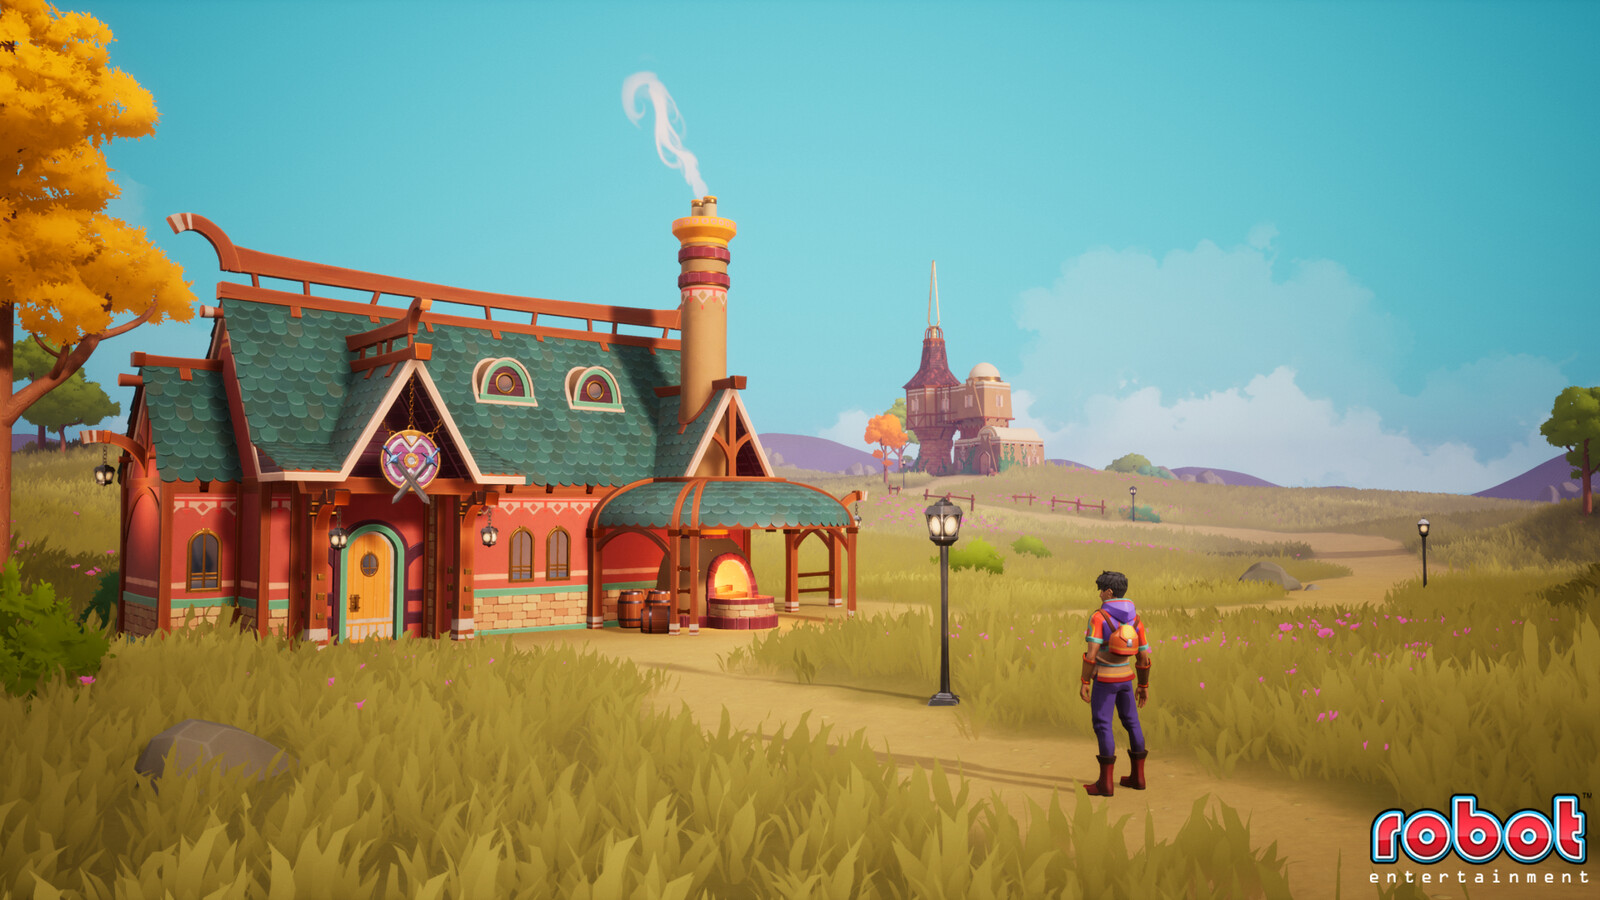 Buildings were created with customization in mind so colors and patterns could be swapped out and customized by the player.